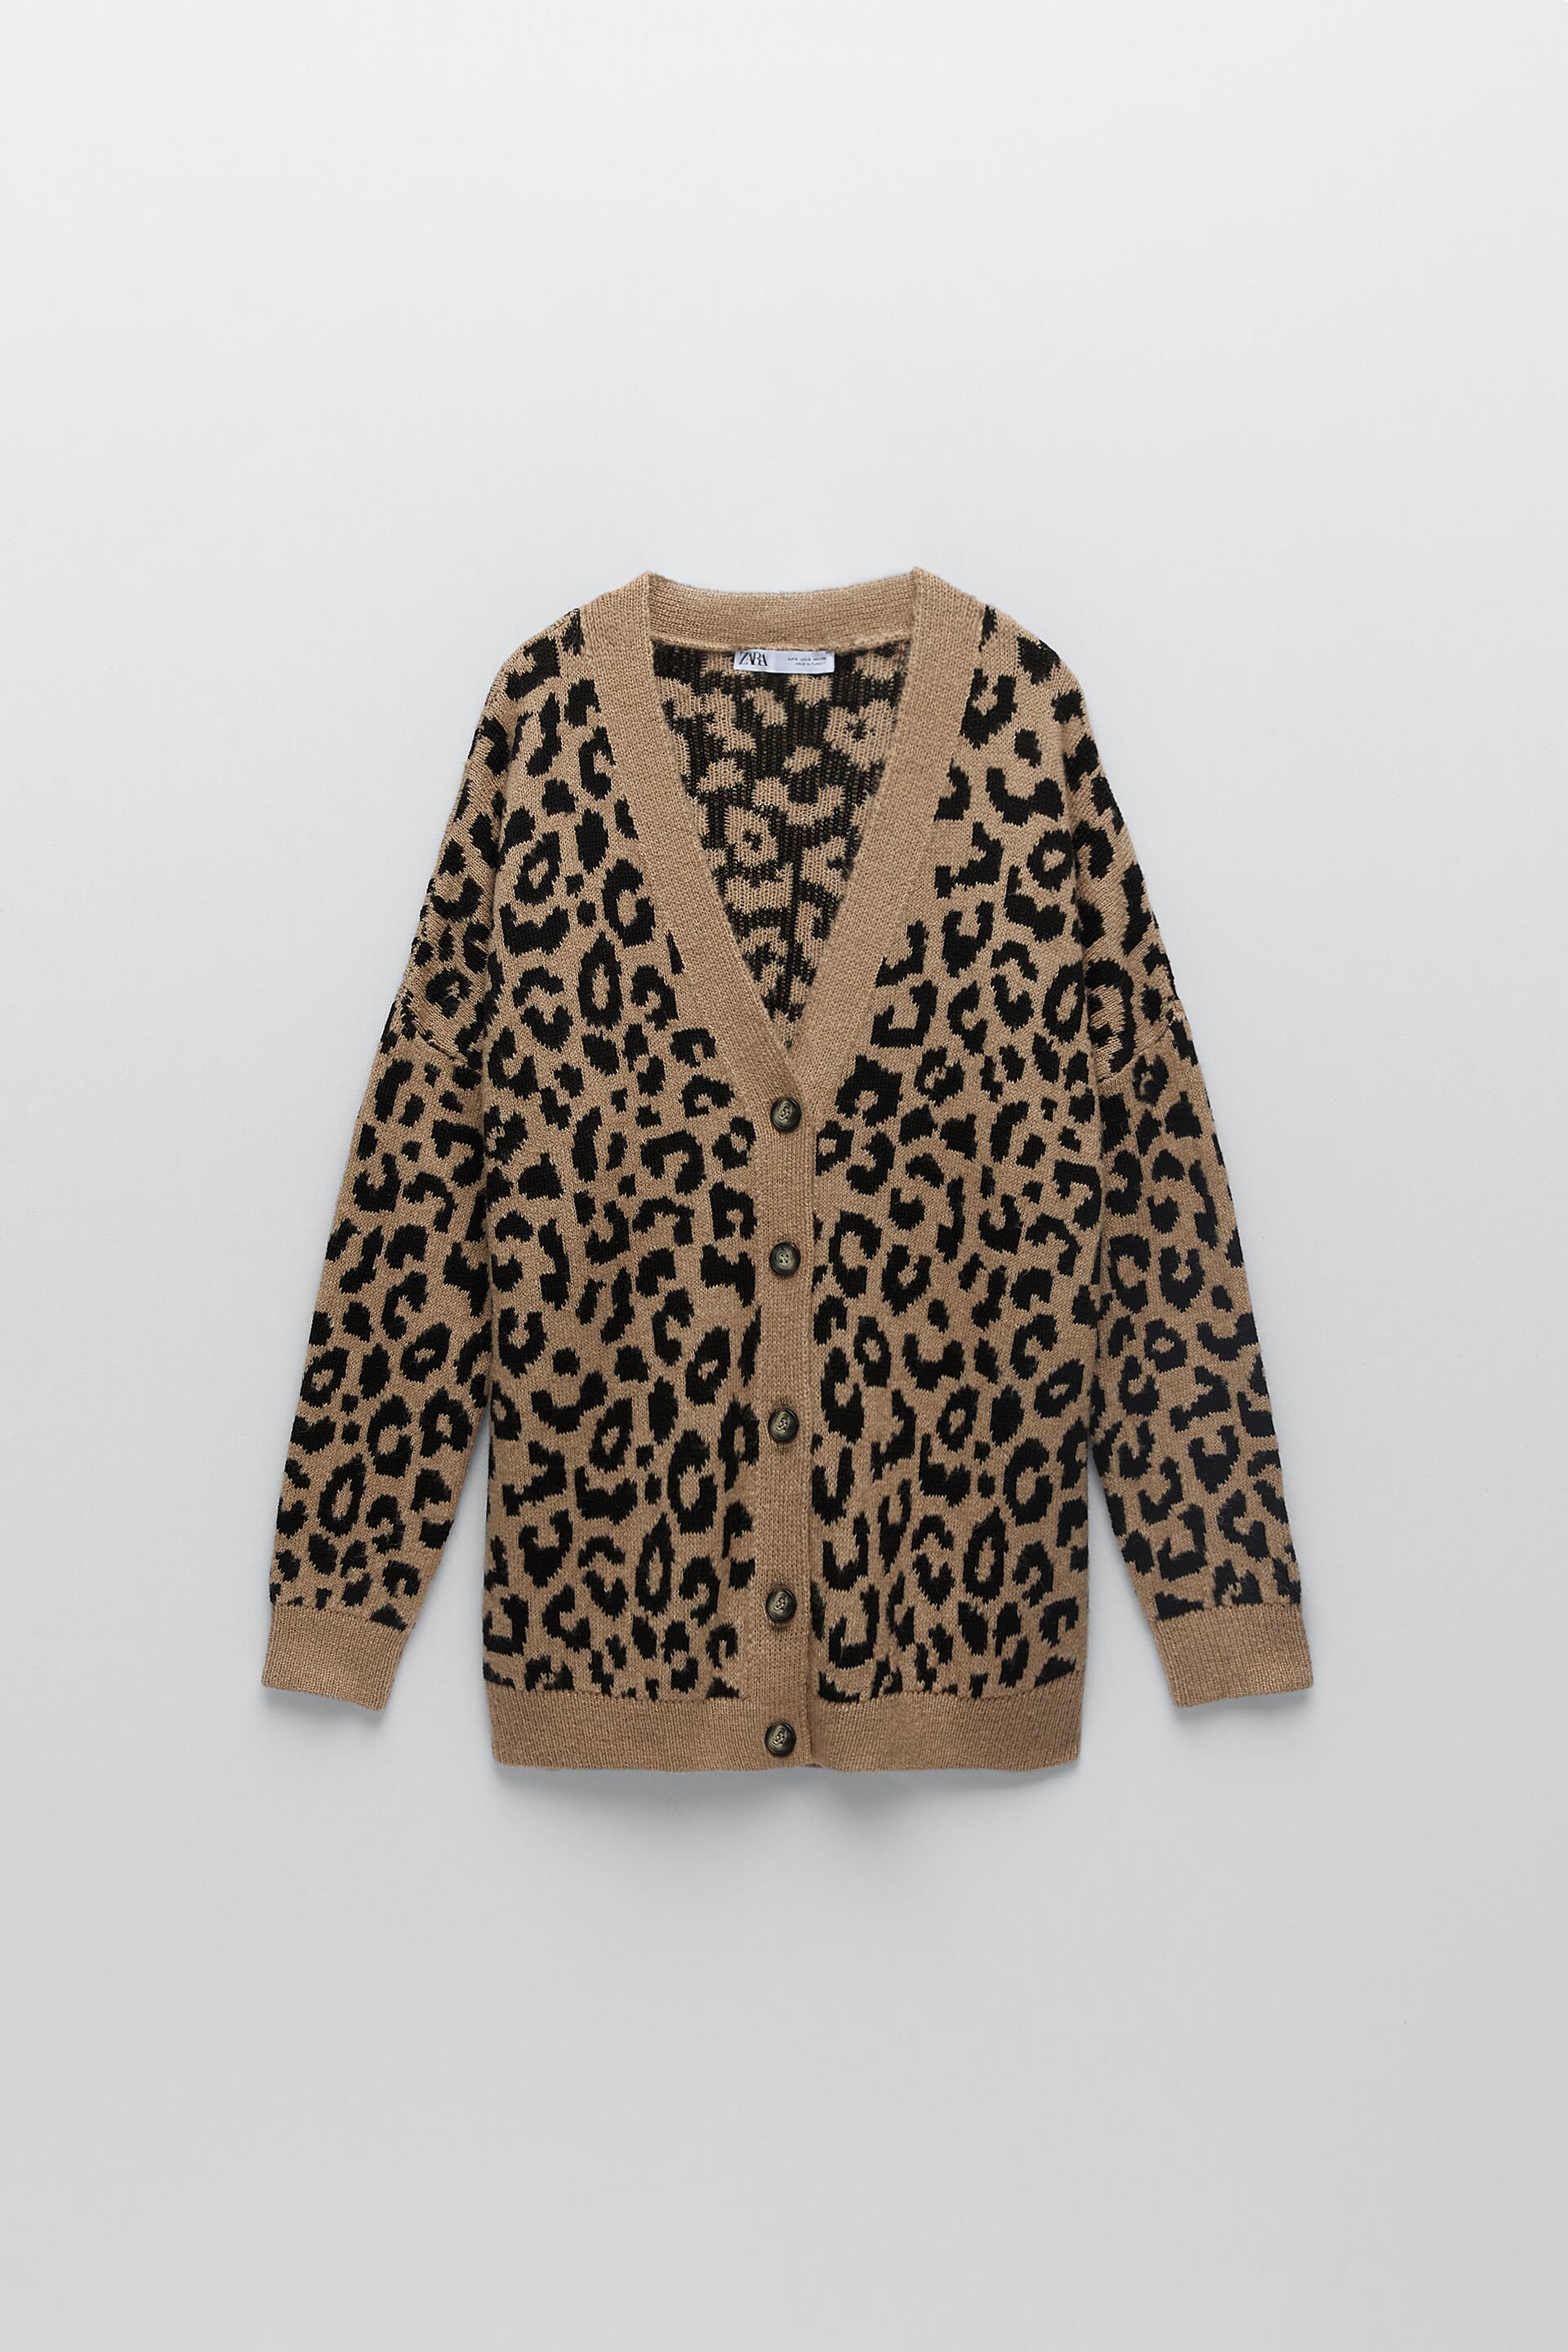 Loosely Hunger fringe Zara KNIT CARDIGAN WITH ANIMAL PRINT - 78751431-051-